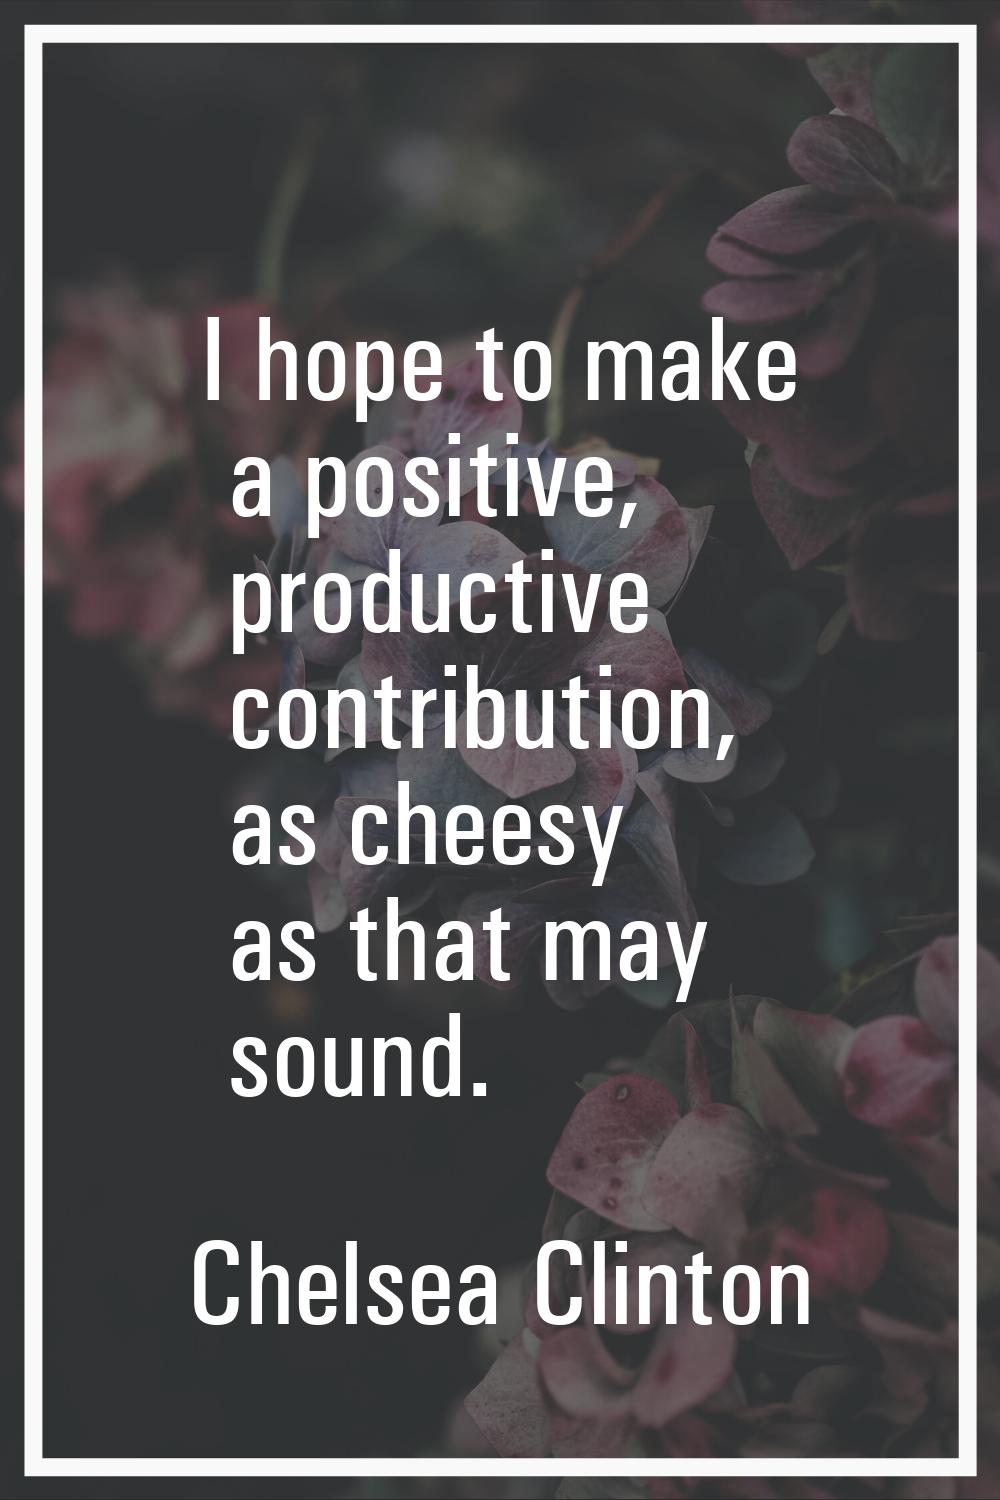 I hope to make a positive, productive contribution, as cheesy as that may sound.